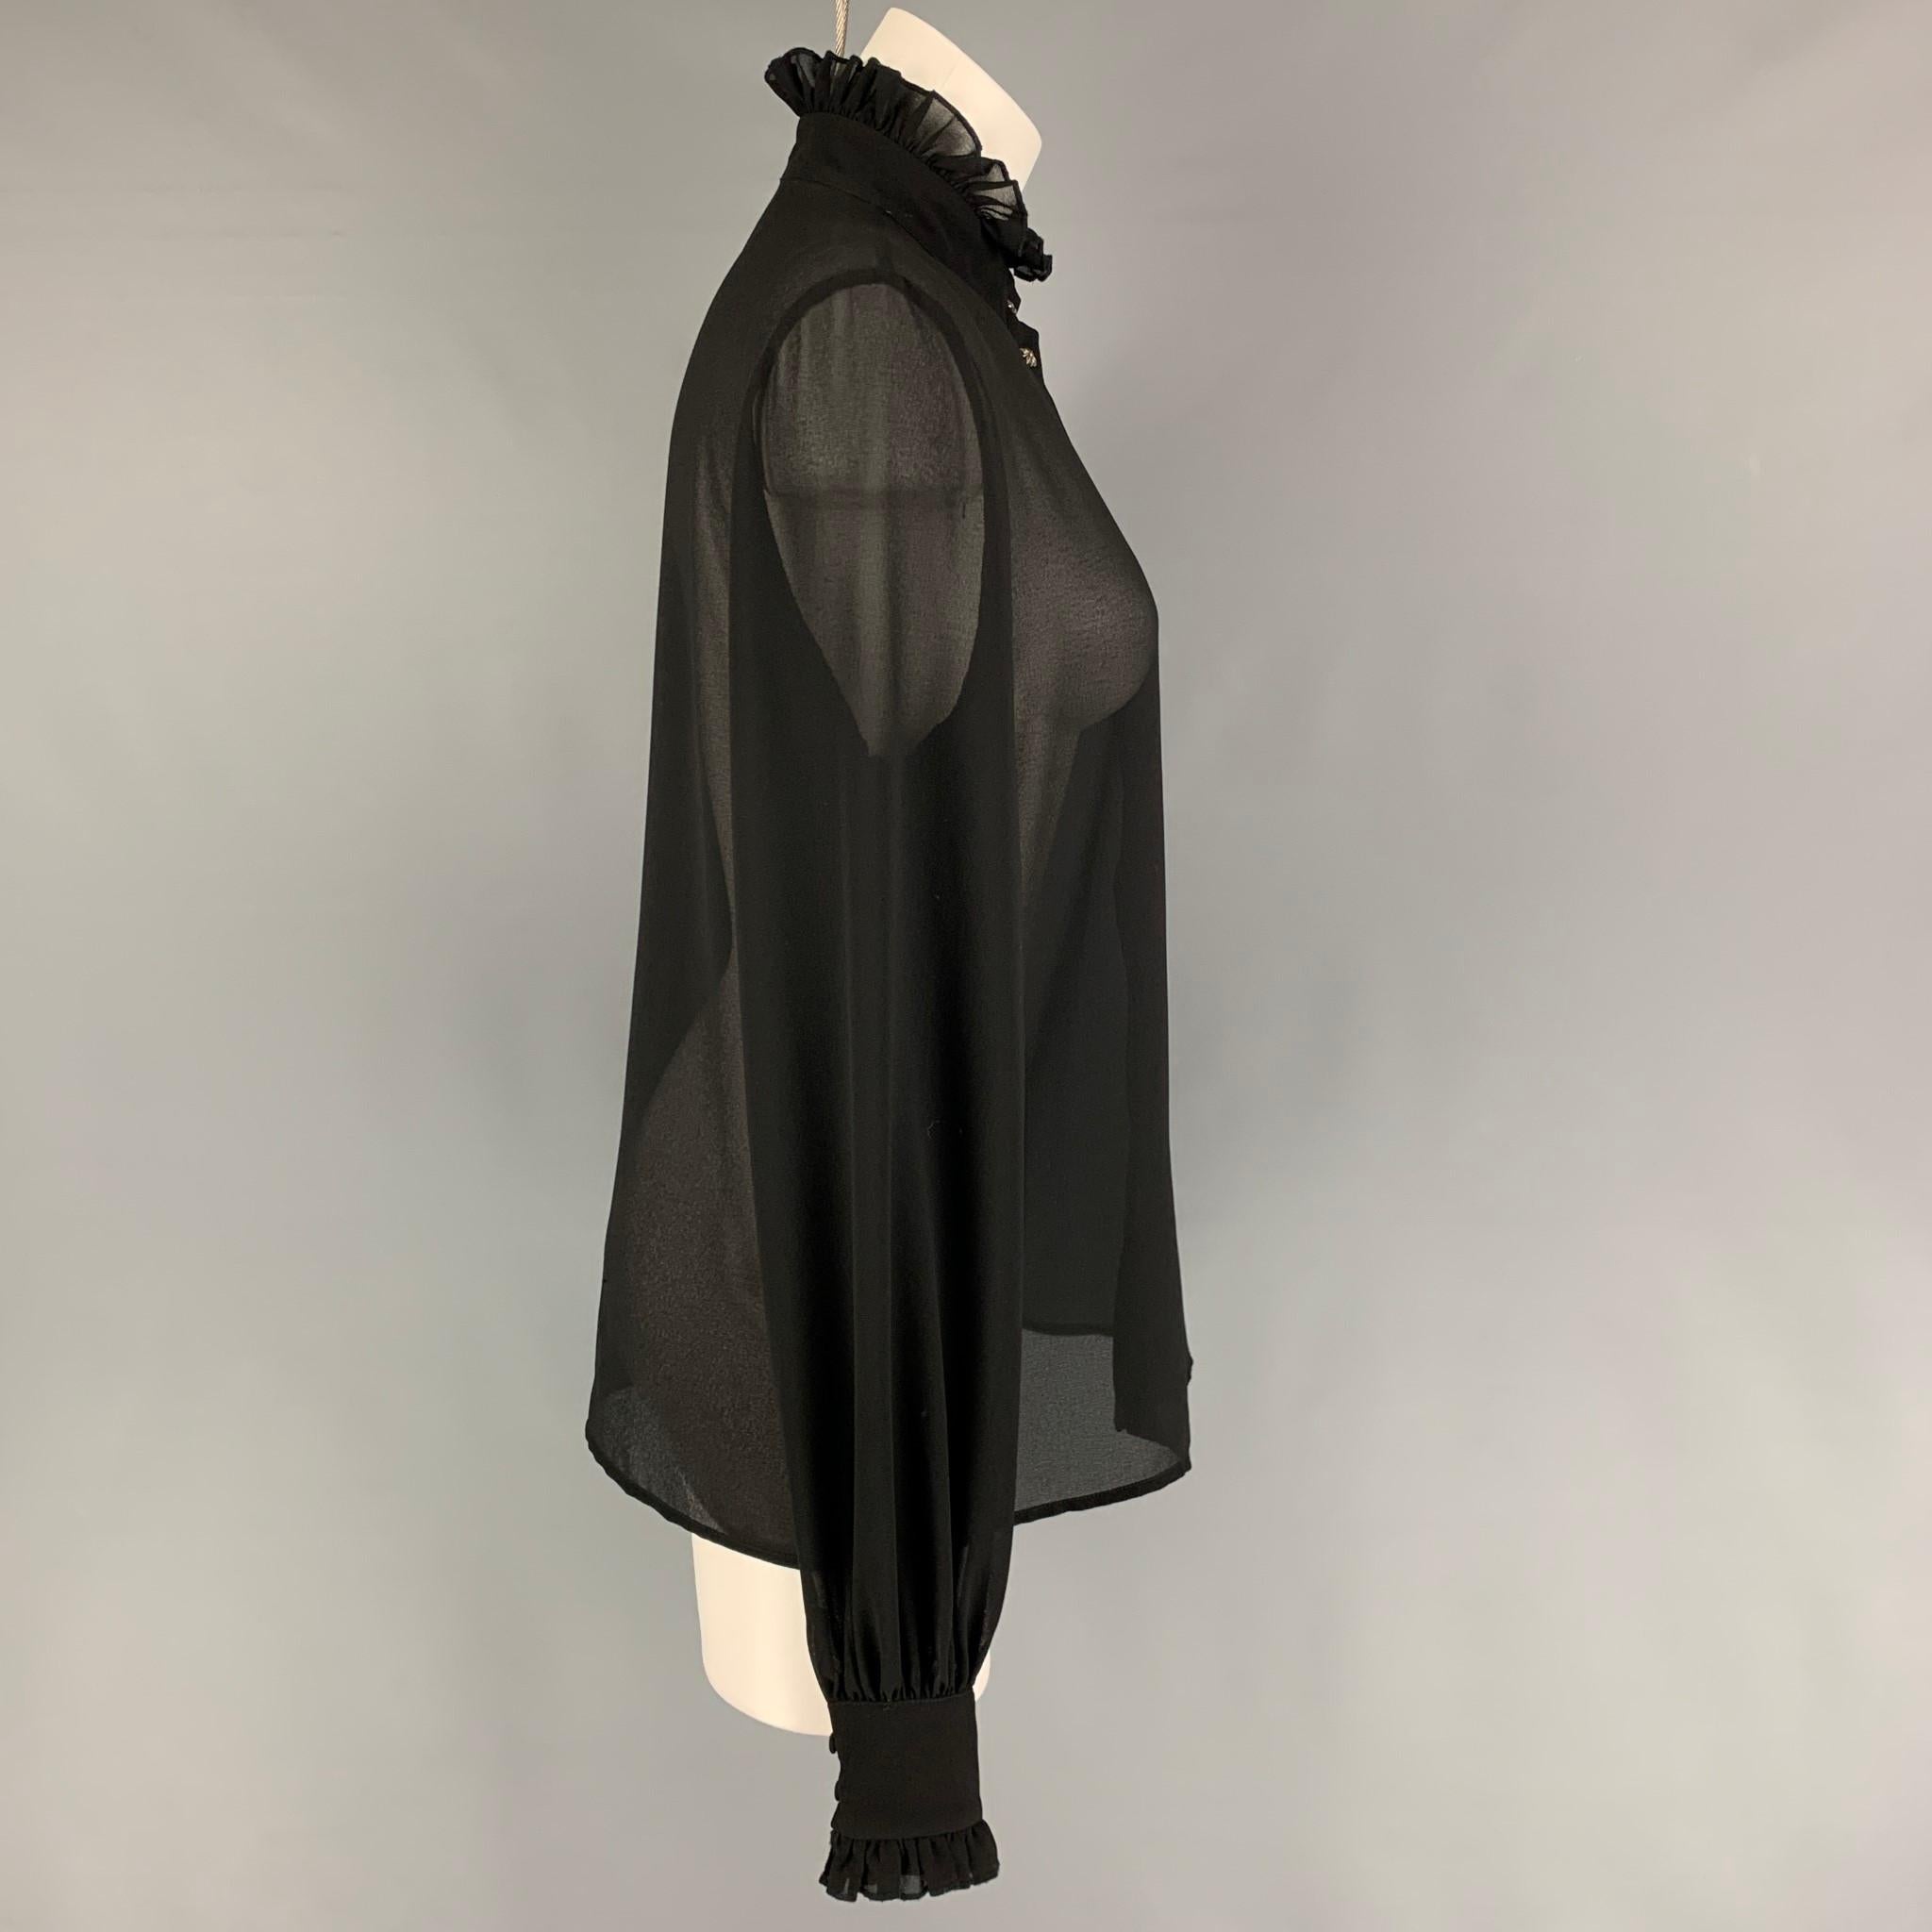 JOHN RICHMOND blouse comes in a black polyester featuring a high collar and a silver tone snap button closure. 

Very Good Pre-Owned Condition.
Marked: 42
Original Retail Price: $463.00

Measurements:

Shoulder: 15.5 in.
Bust: 38 in. 
Sleeve: 28.5